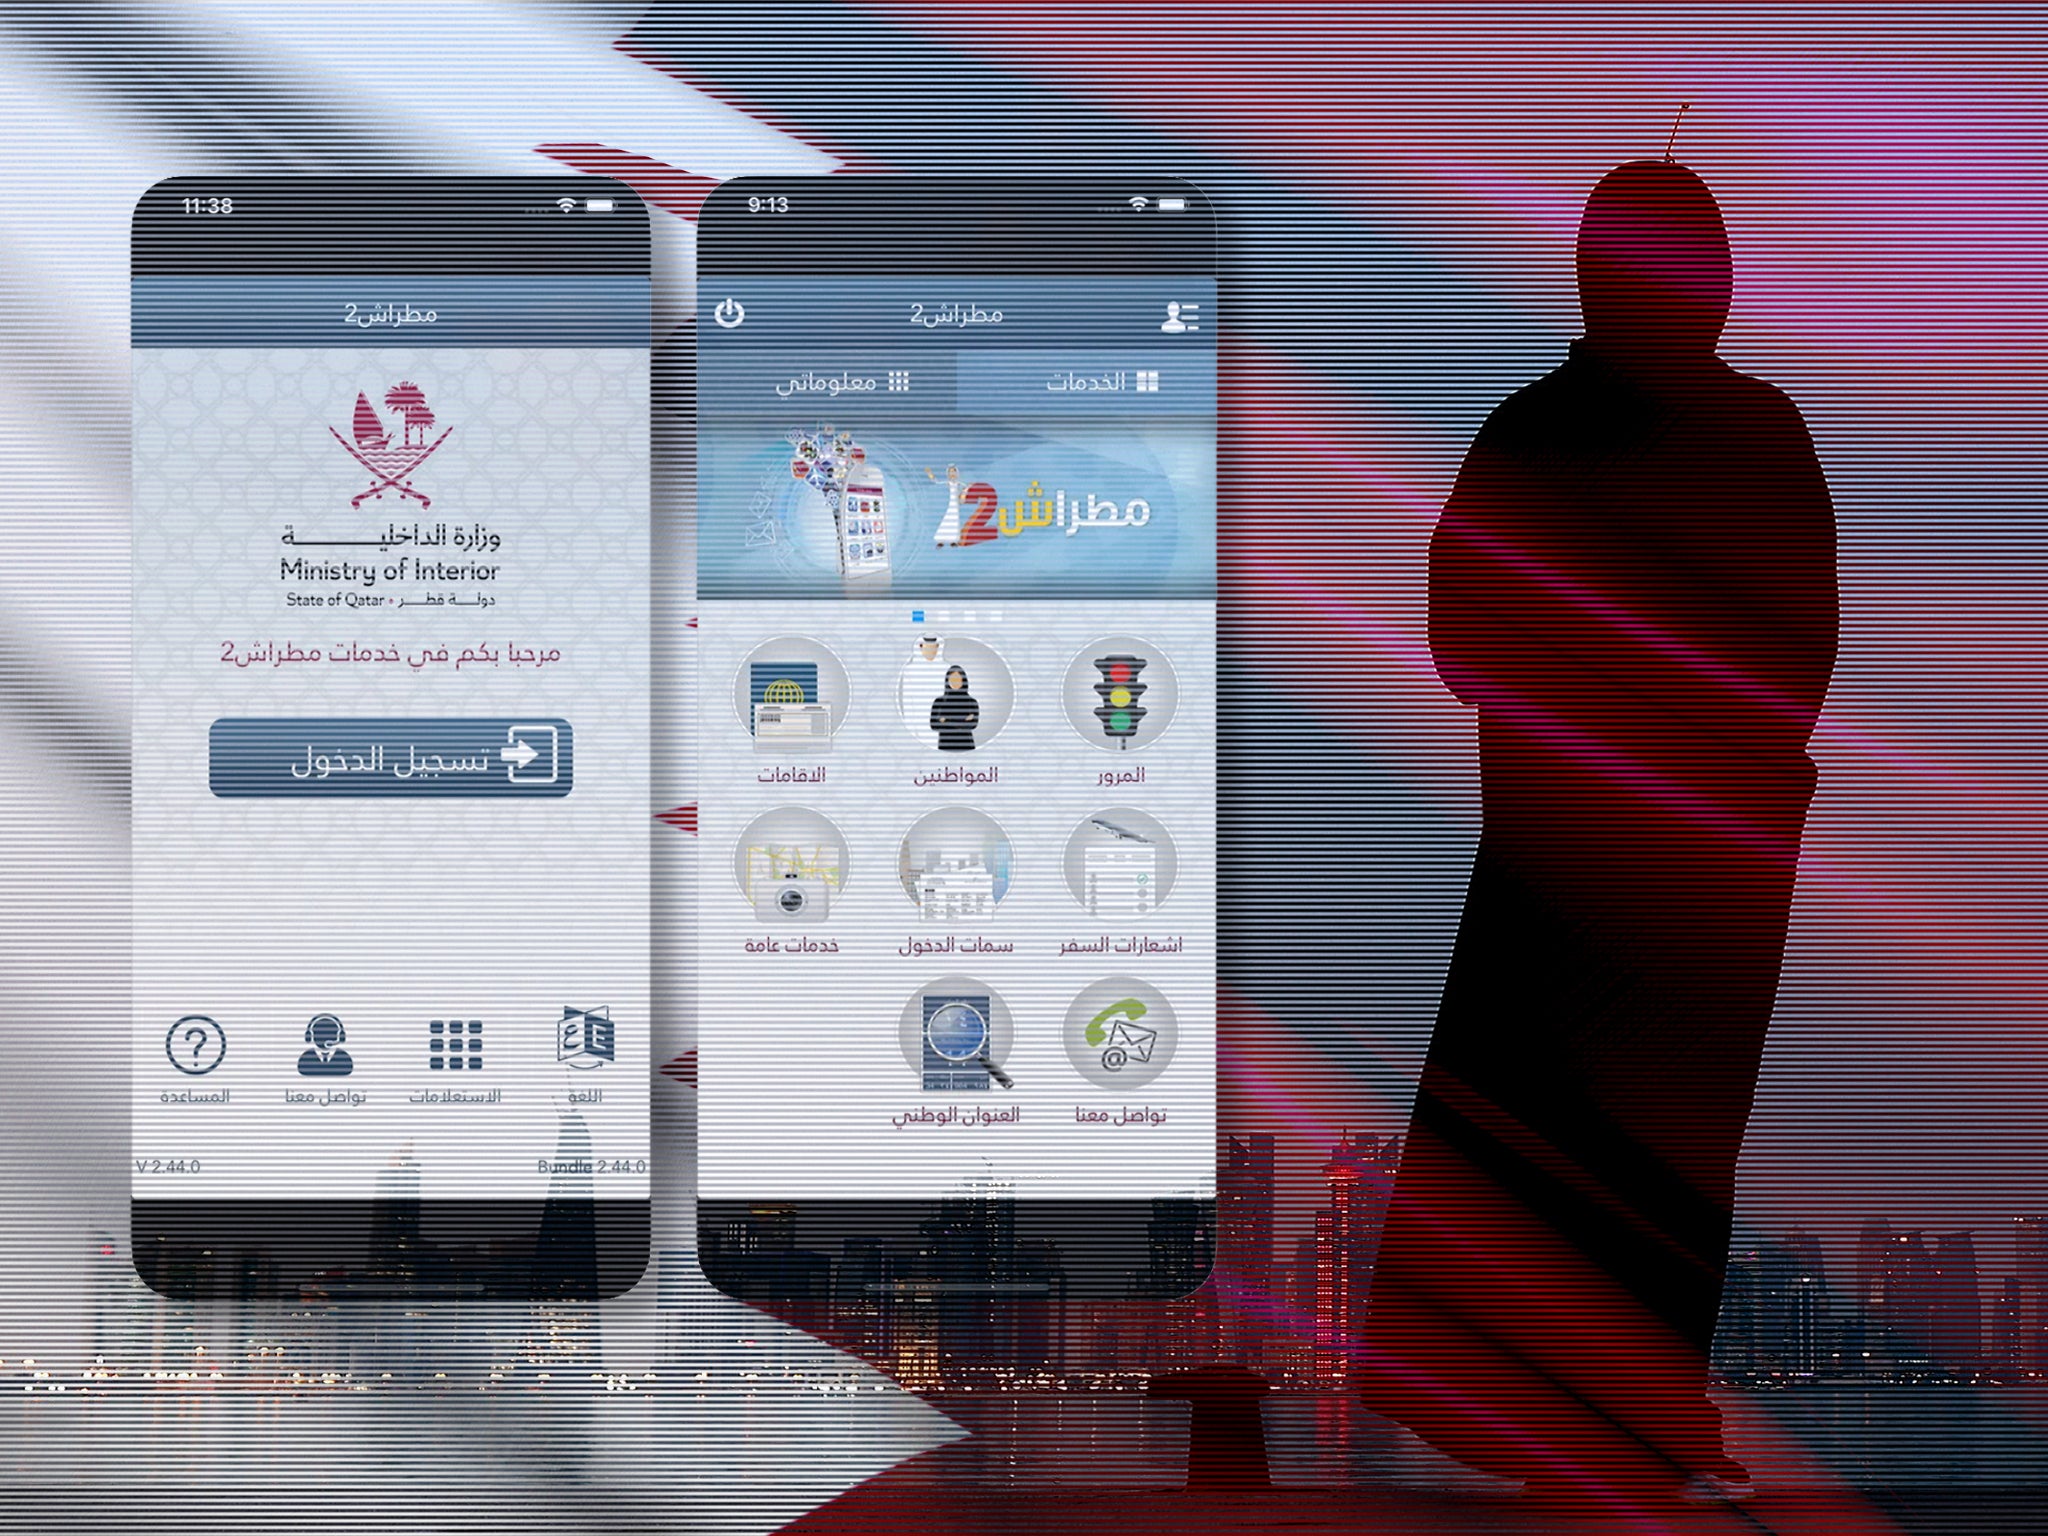 The Independent can reveal that the Qatari Ministry of Interior (MOI) app Metrash2 is available on Apple’s app store and Google Play – it has been downloaded more than a million times on the latter platform